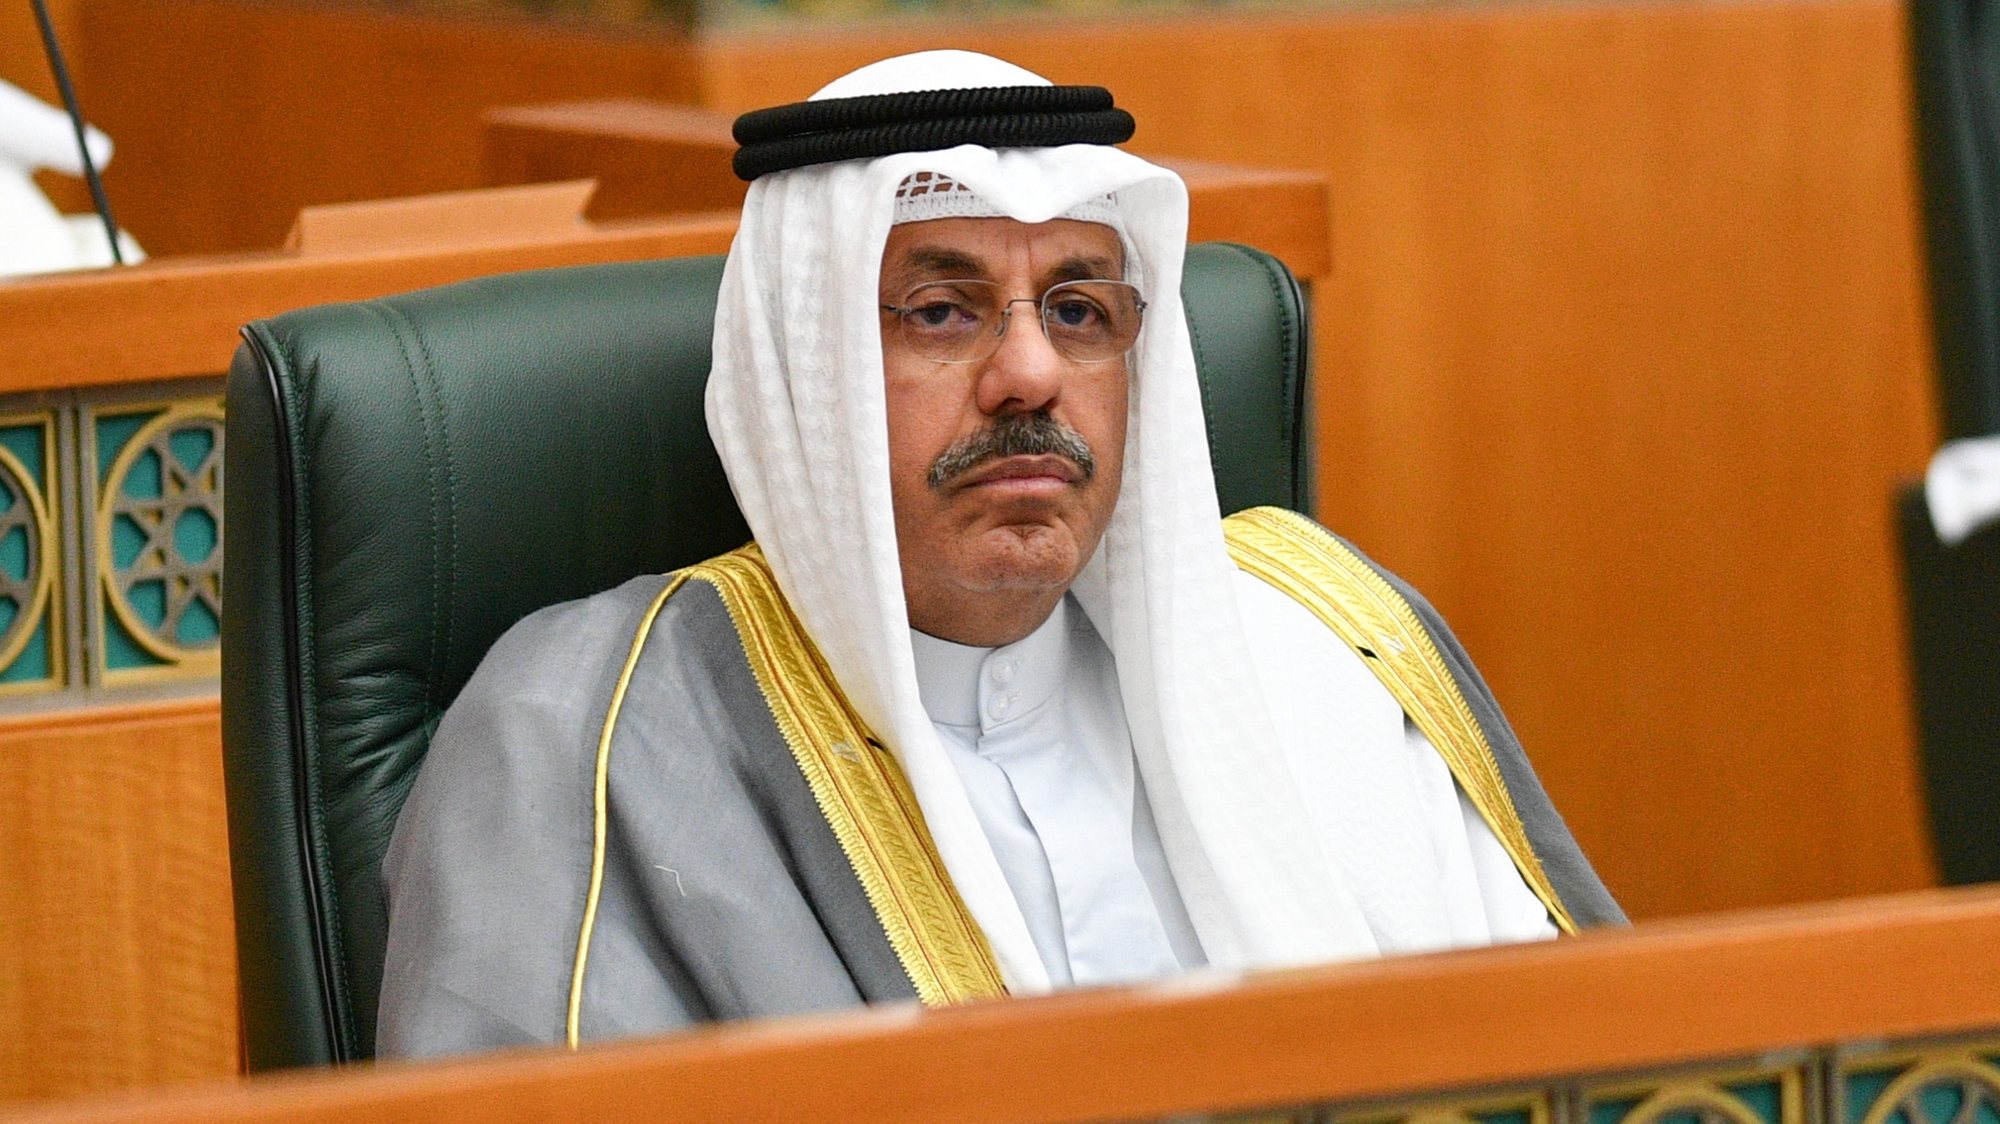 epa10264860 Kuwait Prime Minister Sheikh Ahmad Nawaf Al-Ahmad Al-Sabah attends the Kuwait parliament special session at the National Assembly Hall in Kuwait City, Kuwait, 25 October 2022. Kuwait National Assembly held a special session on 25 October to discuss a number of bills related to budgets of ministries, government departments, and independent bodies for the fiscal year 2022-23.  EPA/NOUFAL IBRAHIM